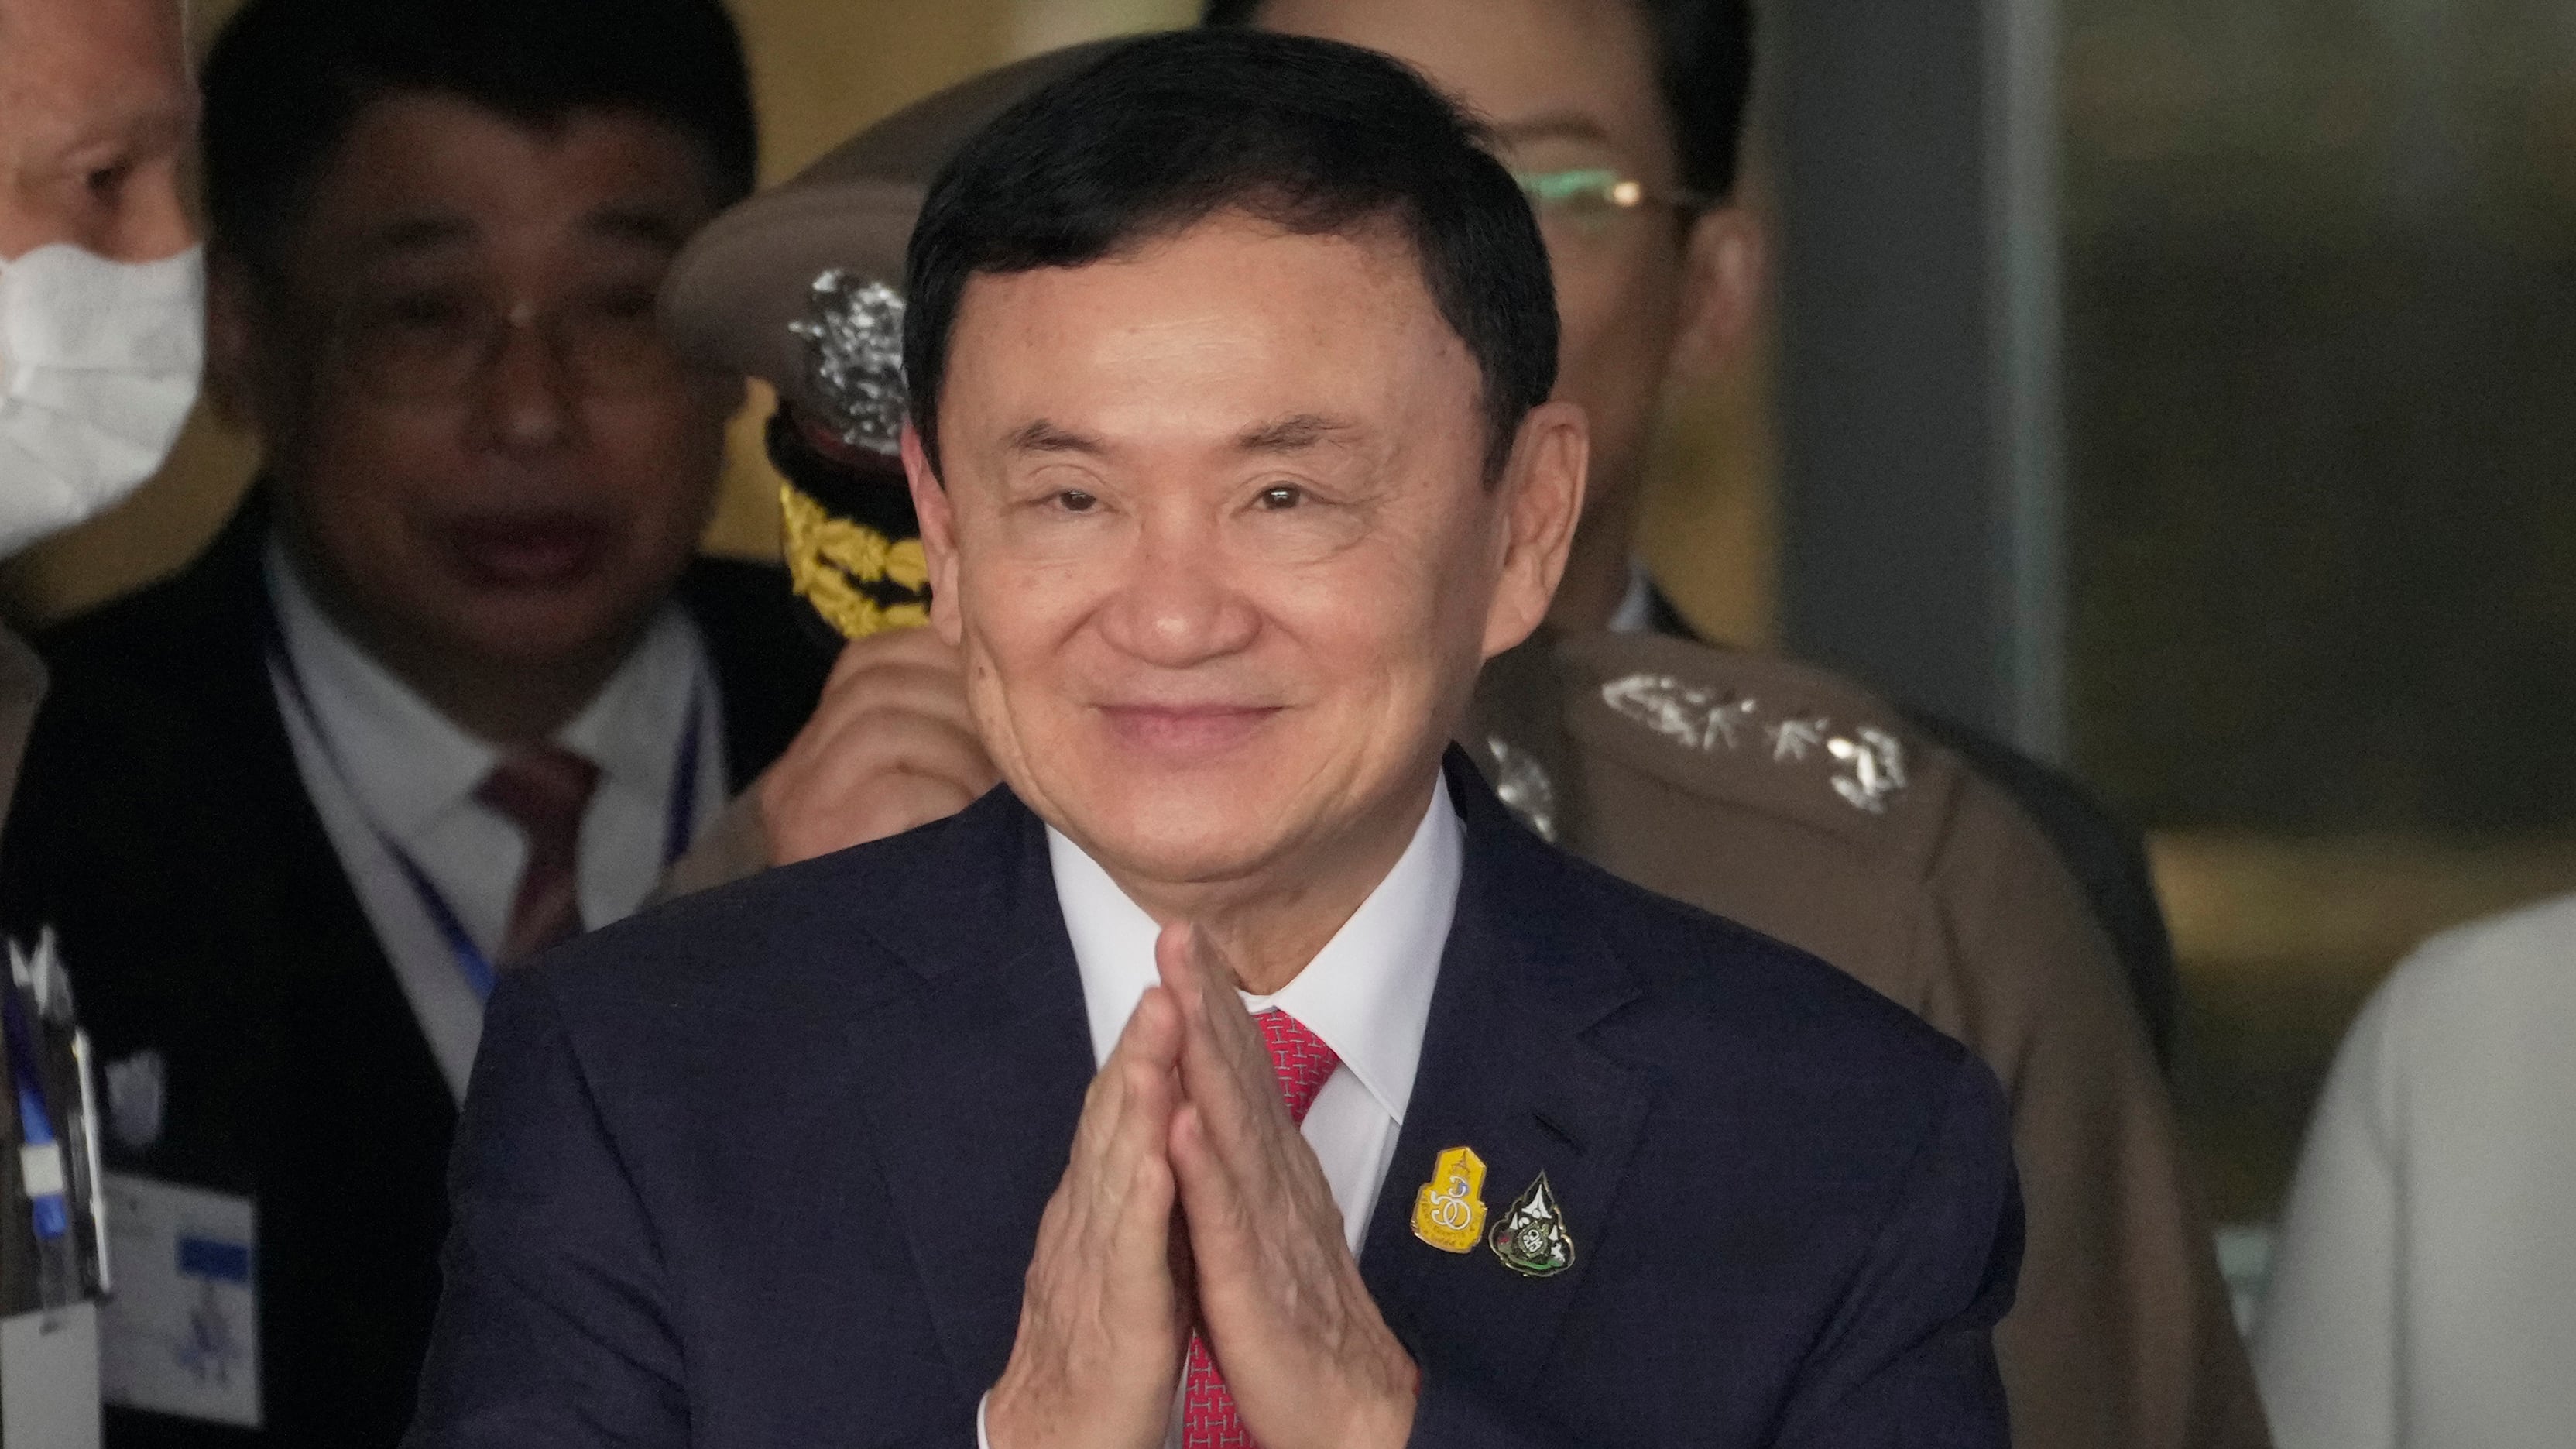 Thaksin Shinawatra has been indicted over accusations that he defamed the country’s monarchy (AP Photo/Sakchai Lalit, File)